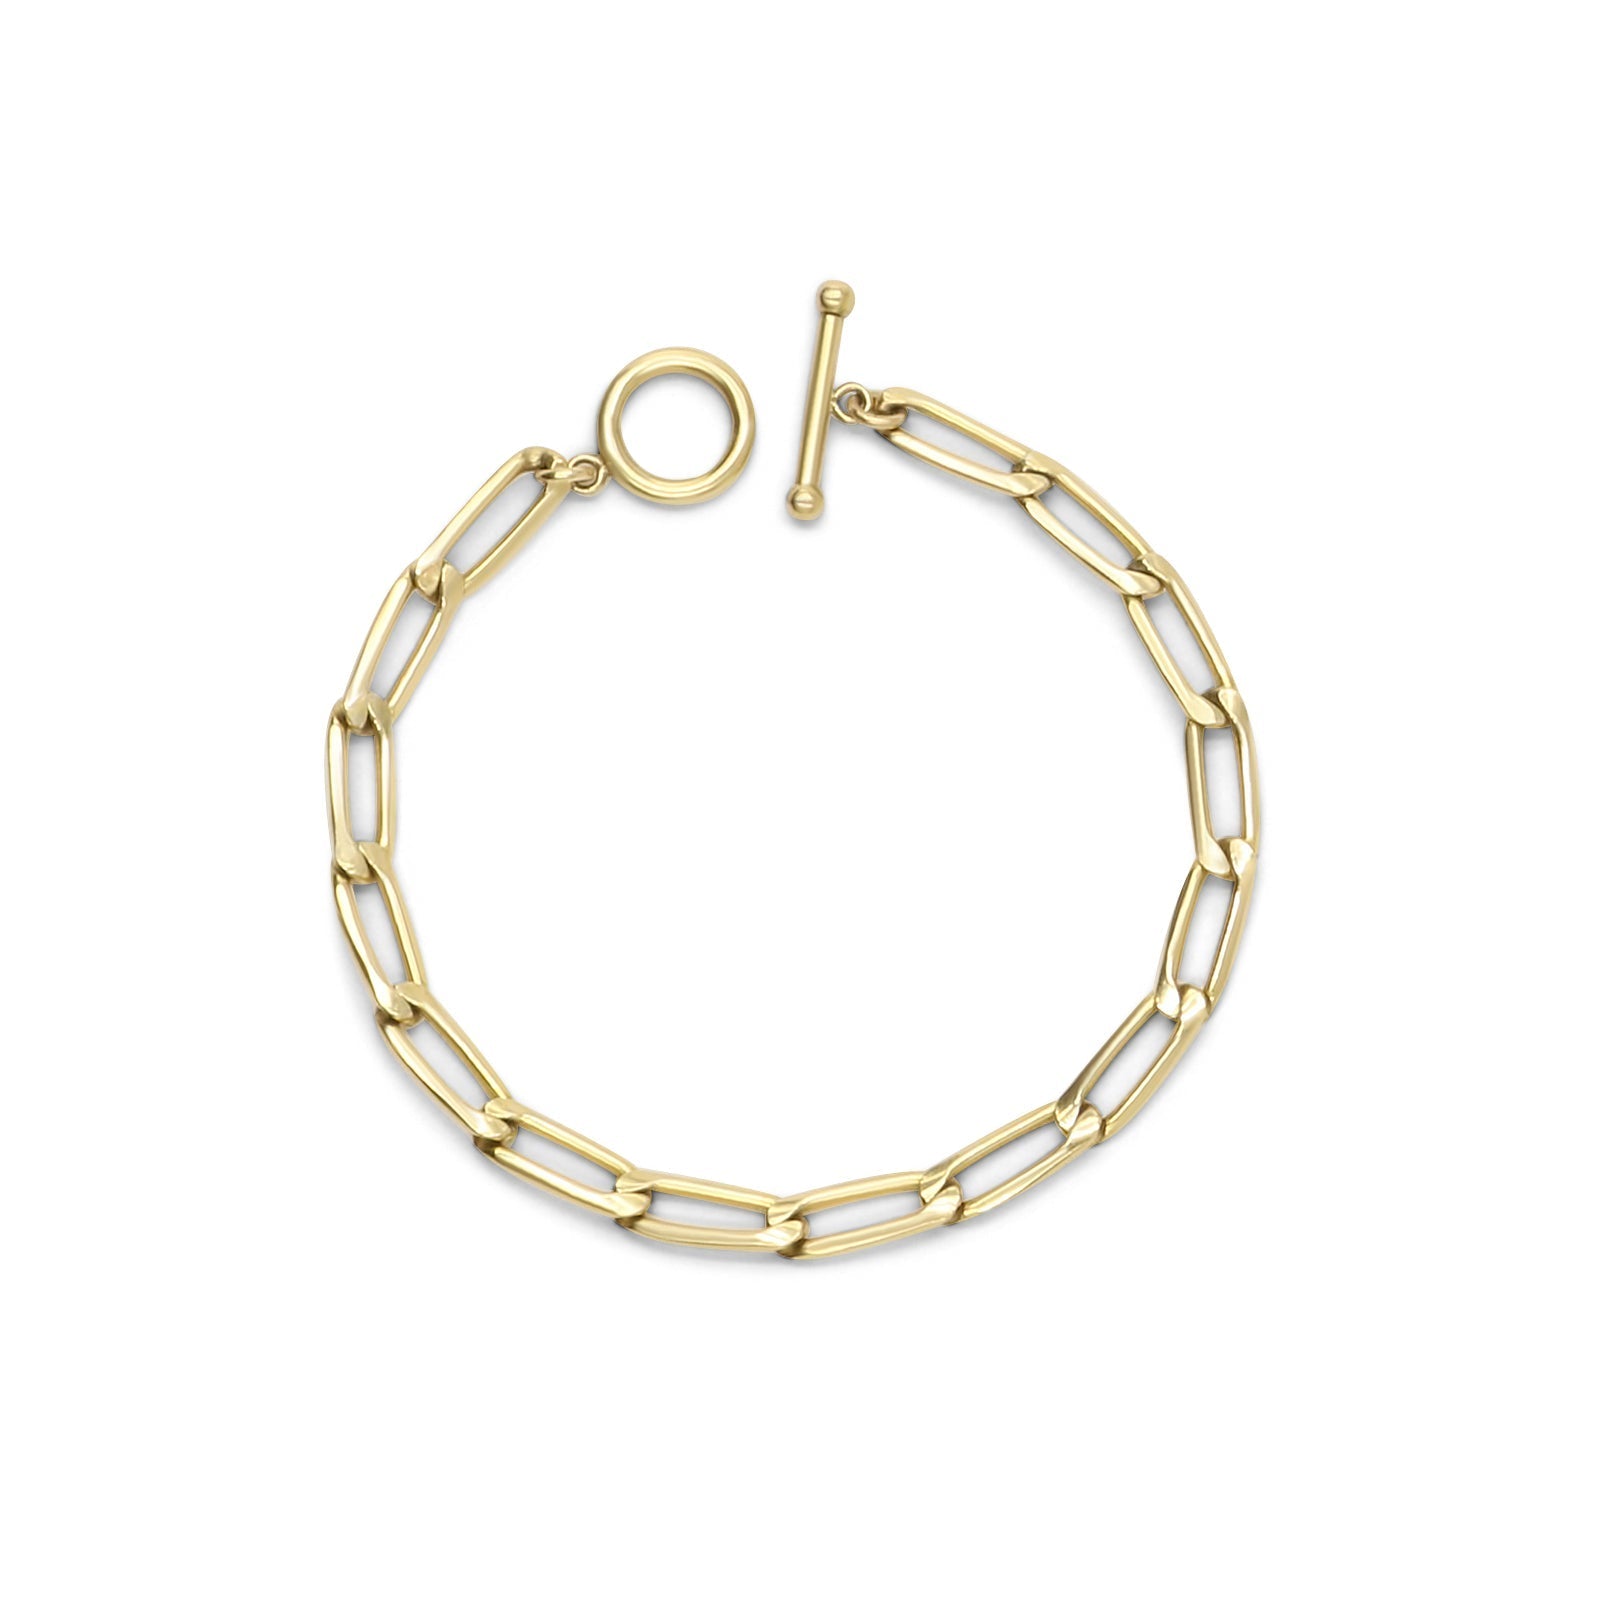 Gold Filled - Large Elongated Curb Chain Bracelet - Camille Jewelry